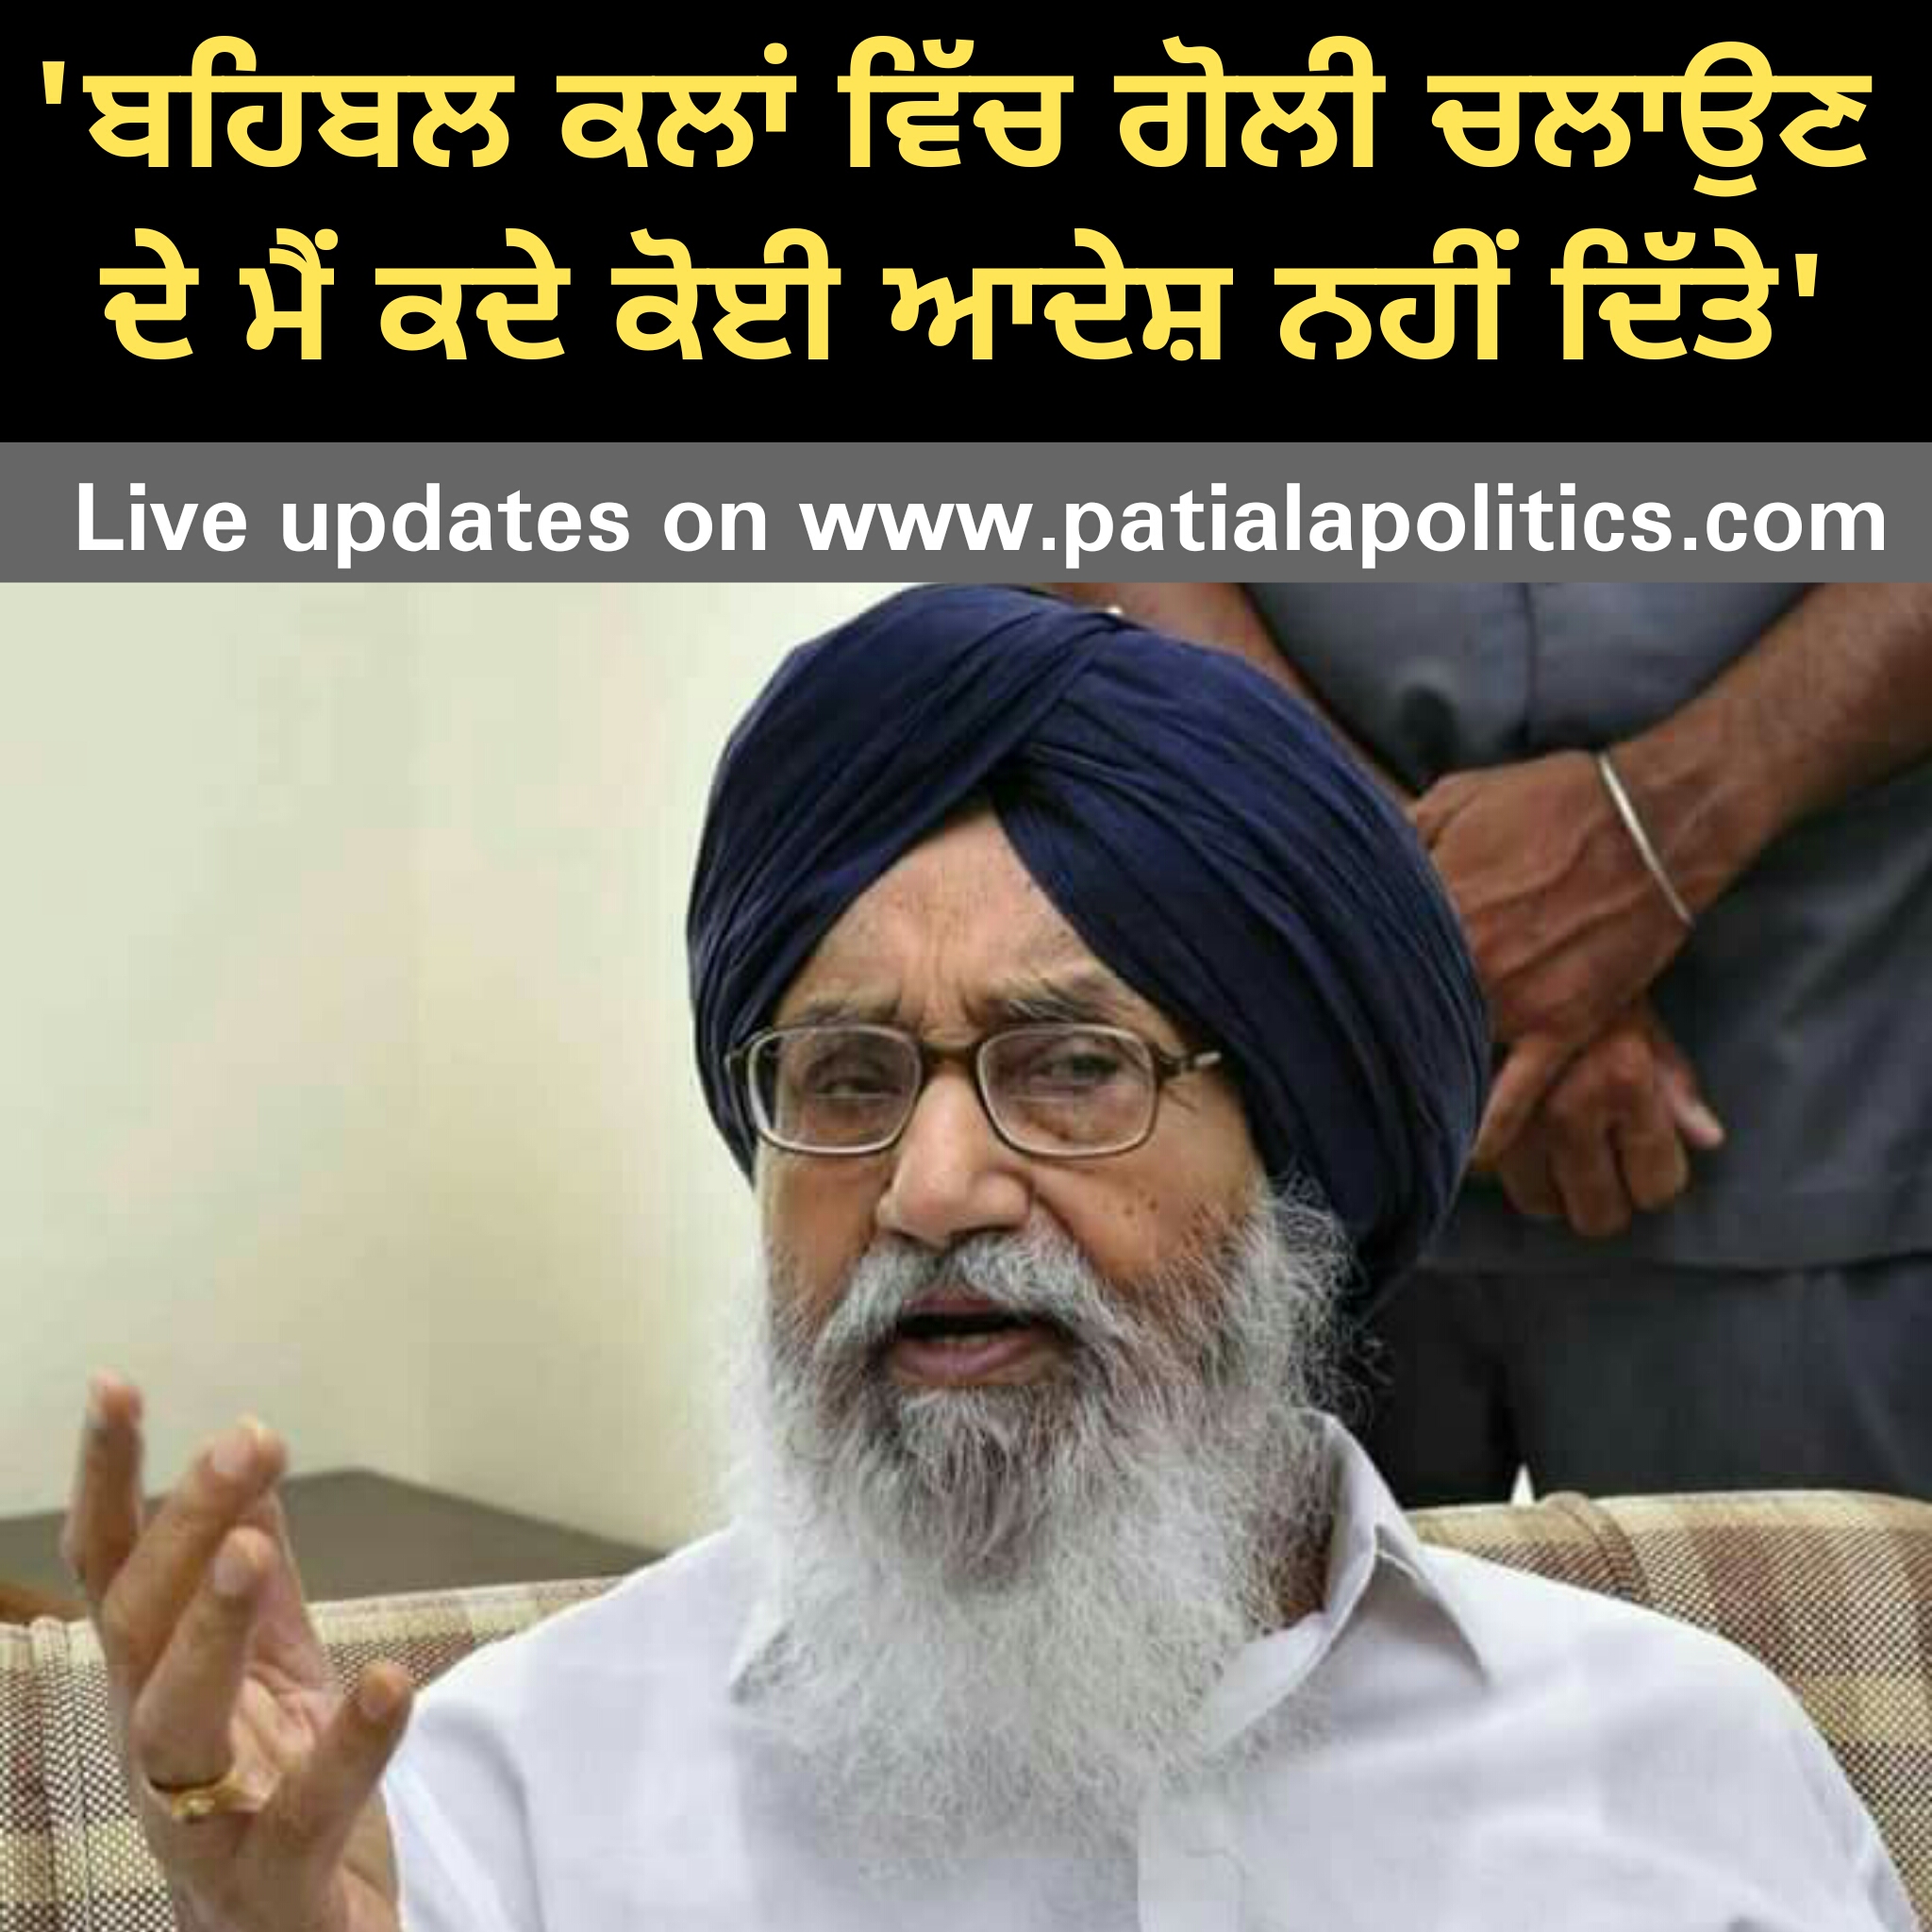 Never passed any orders for Firing in Sacrilege Case: Badal - Patiala News  | Patiala Politics - Latest Patiala News